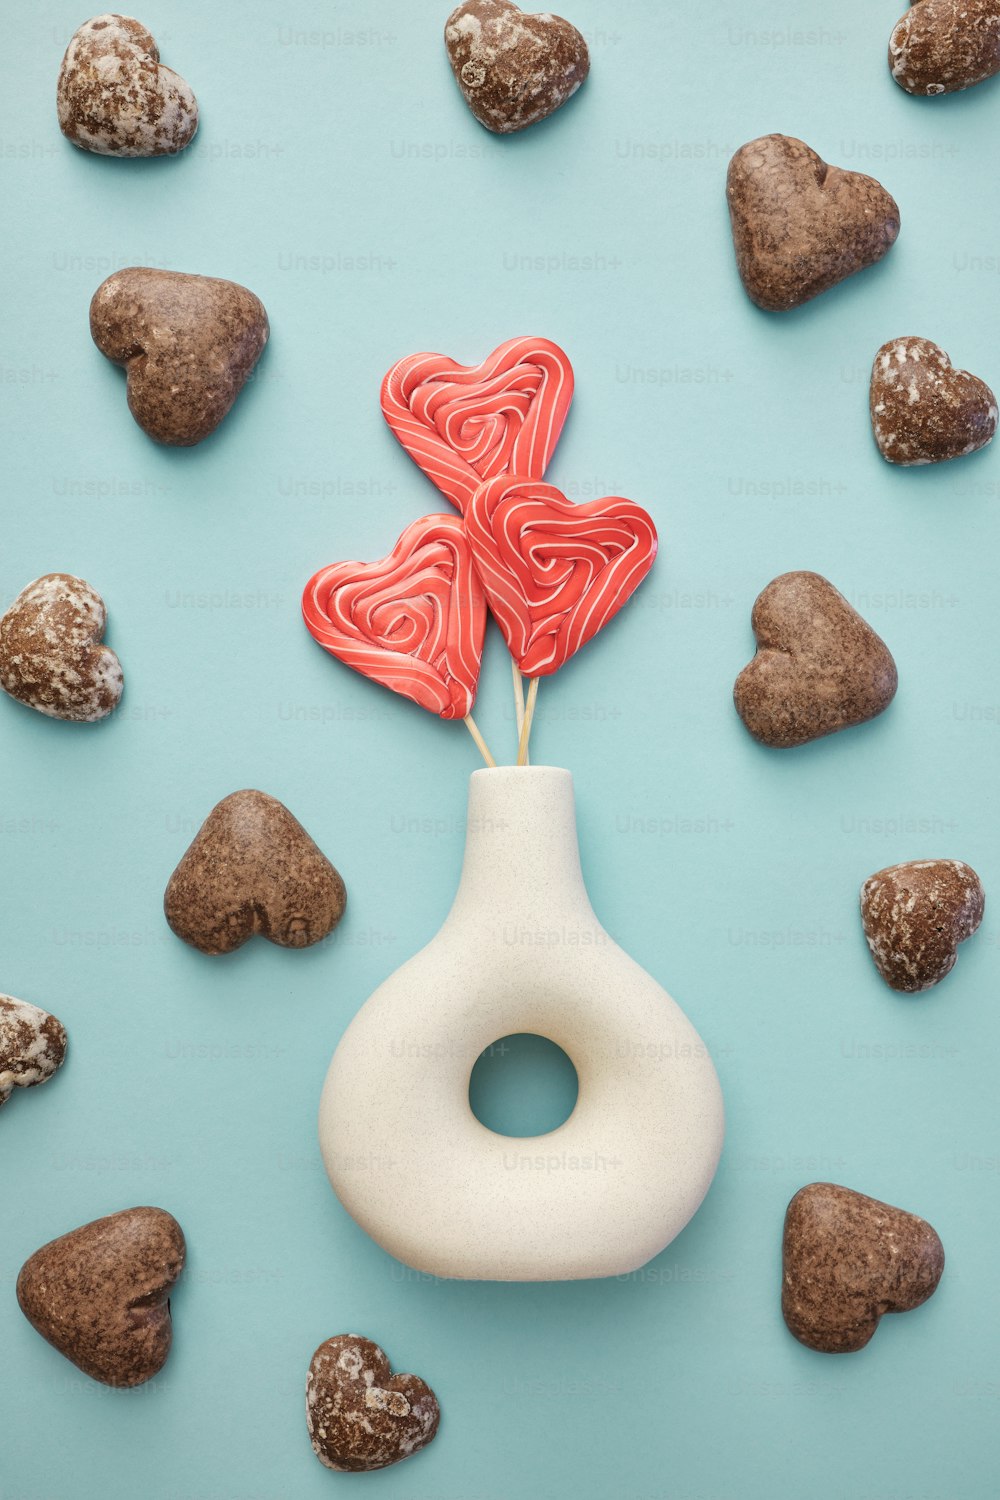 a heart shaped lollipop in a vase surrounded by rocks